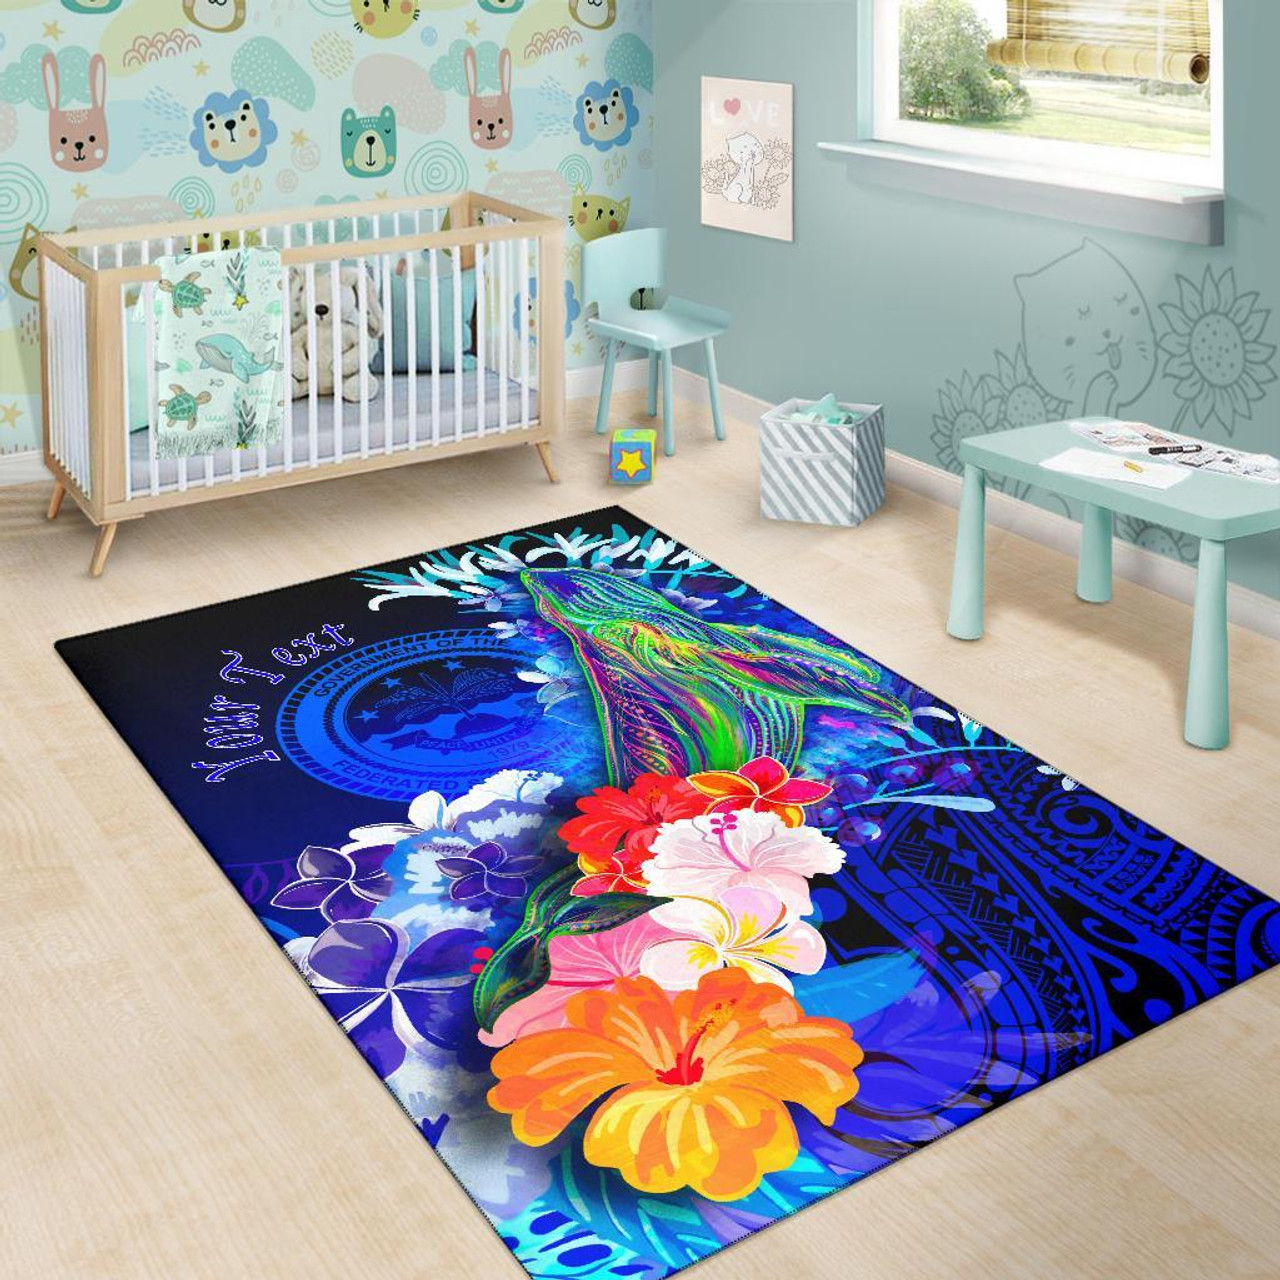 Federated States of Micronesia Custom Personalised Area Rug - Humpback Whale with Tropical Flowers (Blue) Polynesian 6